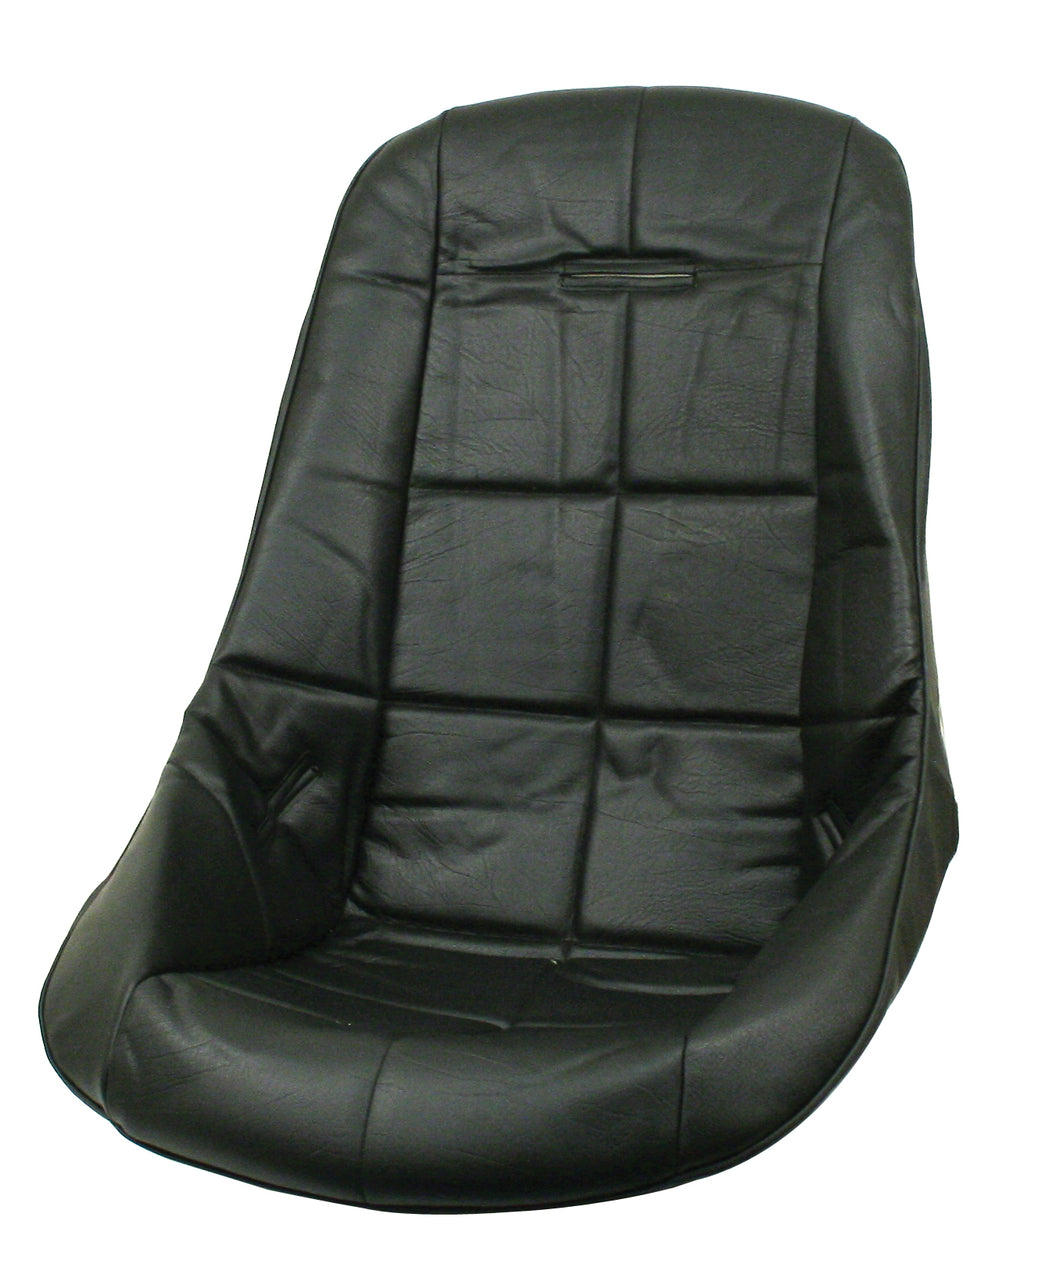 Empi Black Seat Cover for Low Back 2400 Seat - Each - 62-2408